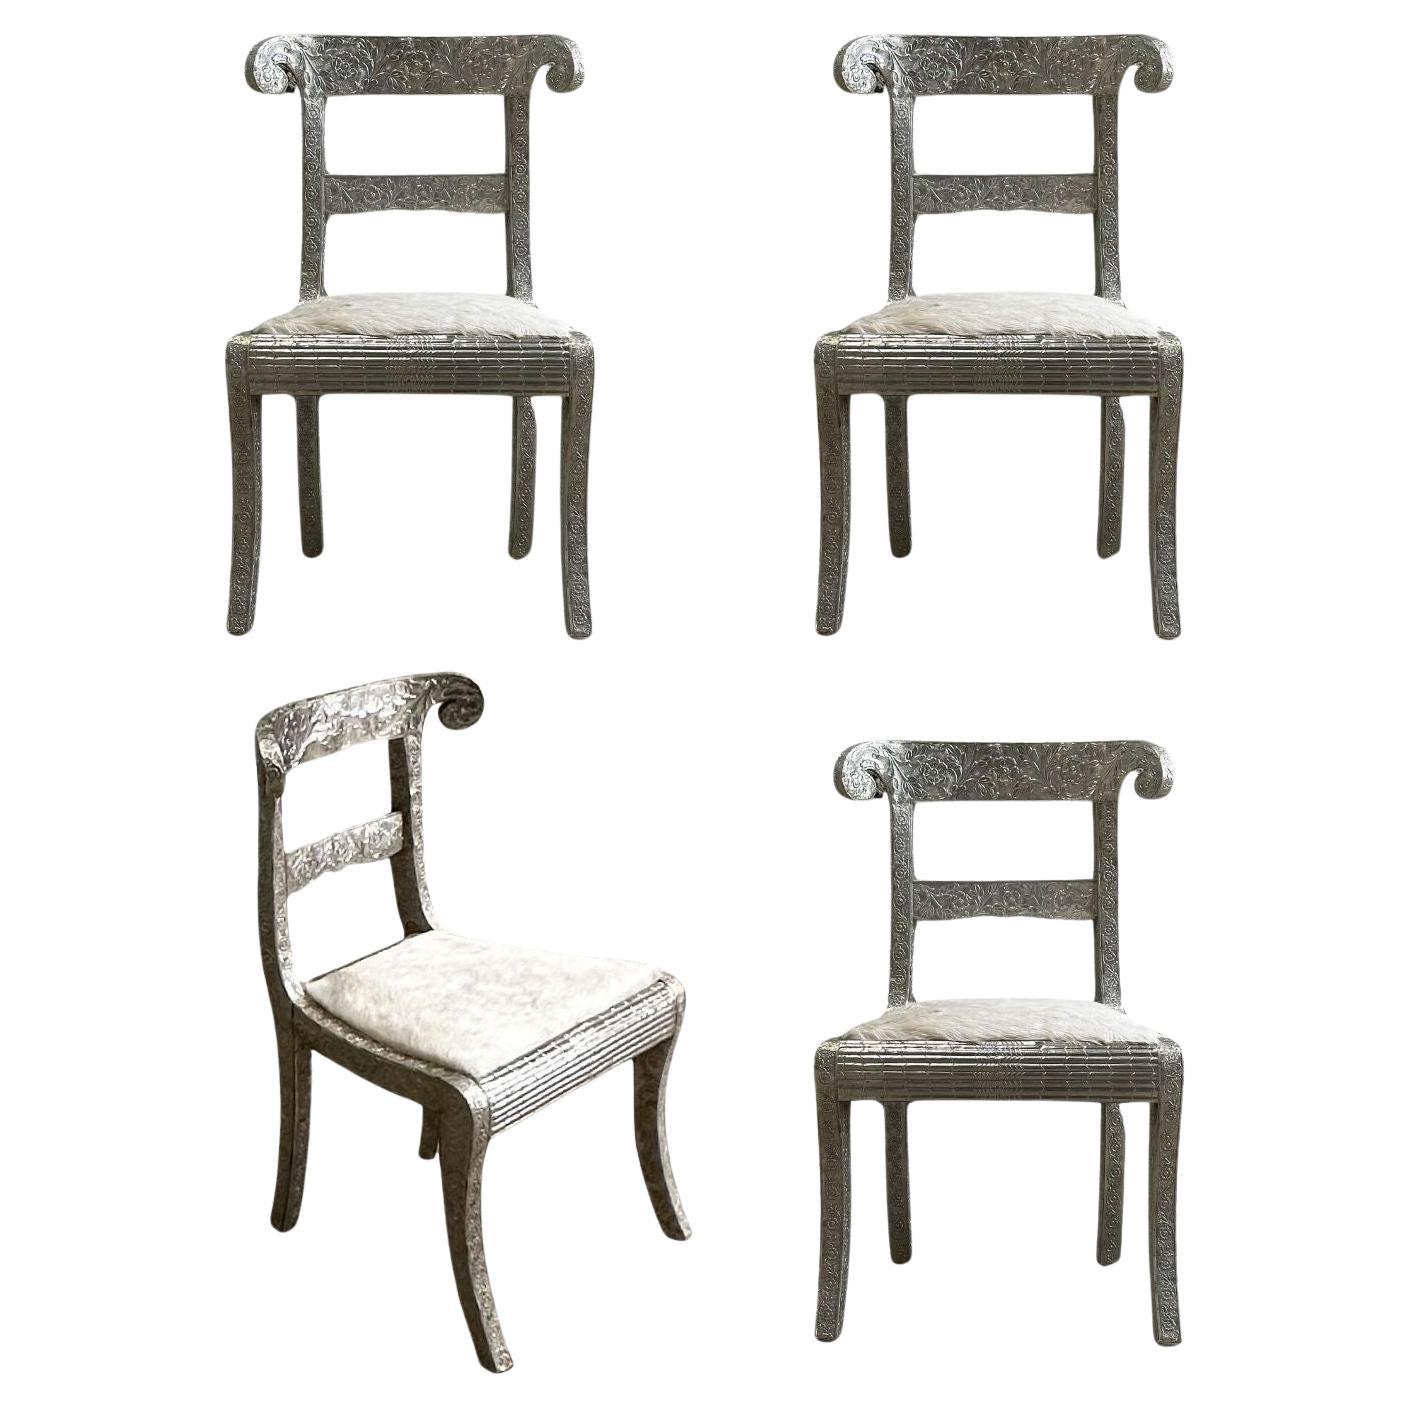 Anglo Raj Style-Indian Hammered Silver Wrap Dining Chairs w/Hair on Hide, 1950 For Sale